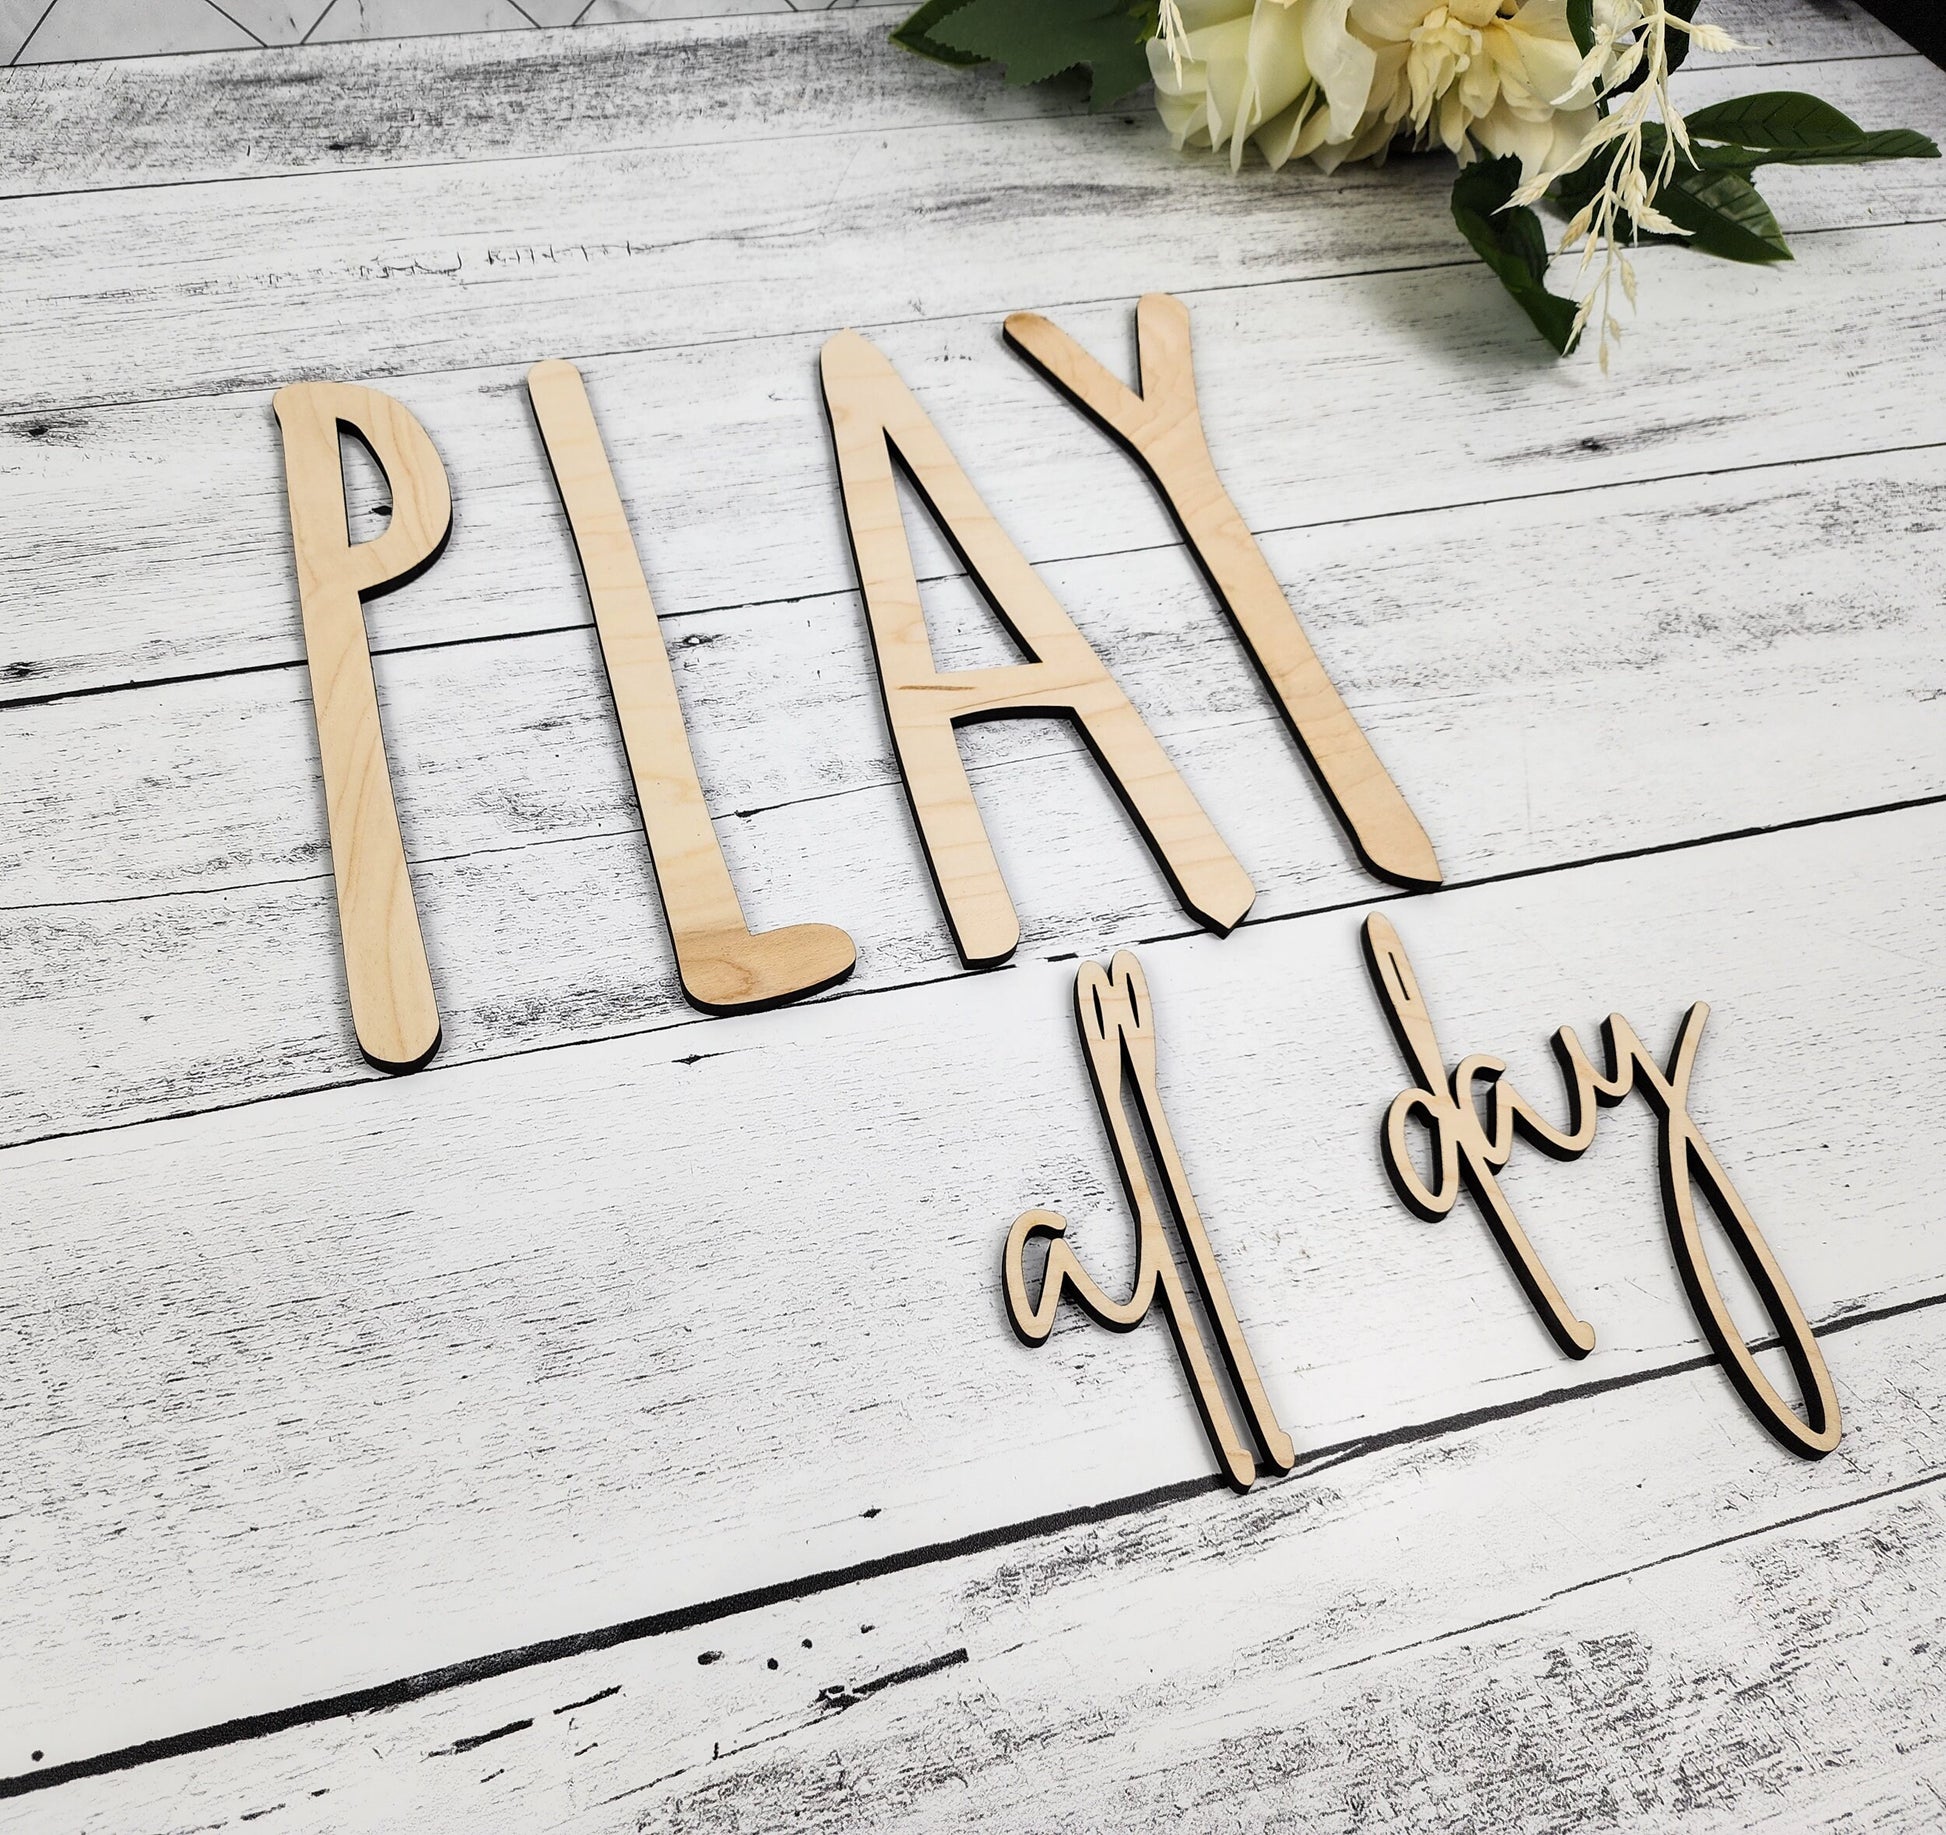 PLAY all day playroom kids toy room decor sign wood wall art, recreational room signage, custom wood cut out words & letters, preschool sign